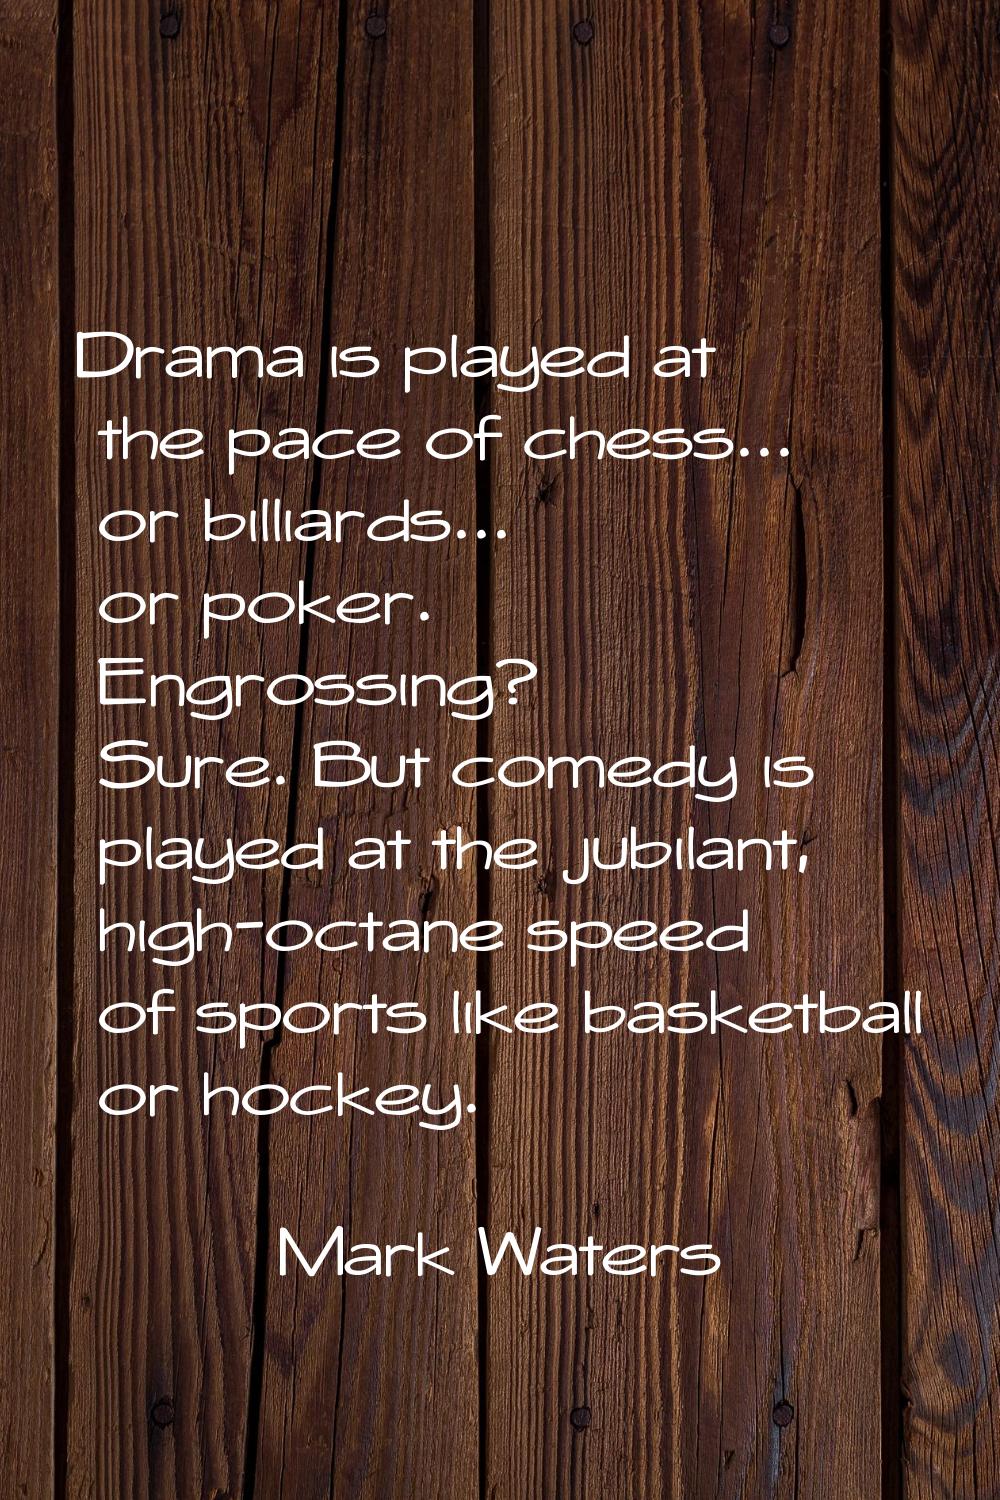 Drama is played at the pace of chess... or billiards... or poker. Engrossing? Sure. But comedy is p